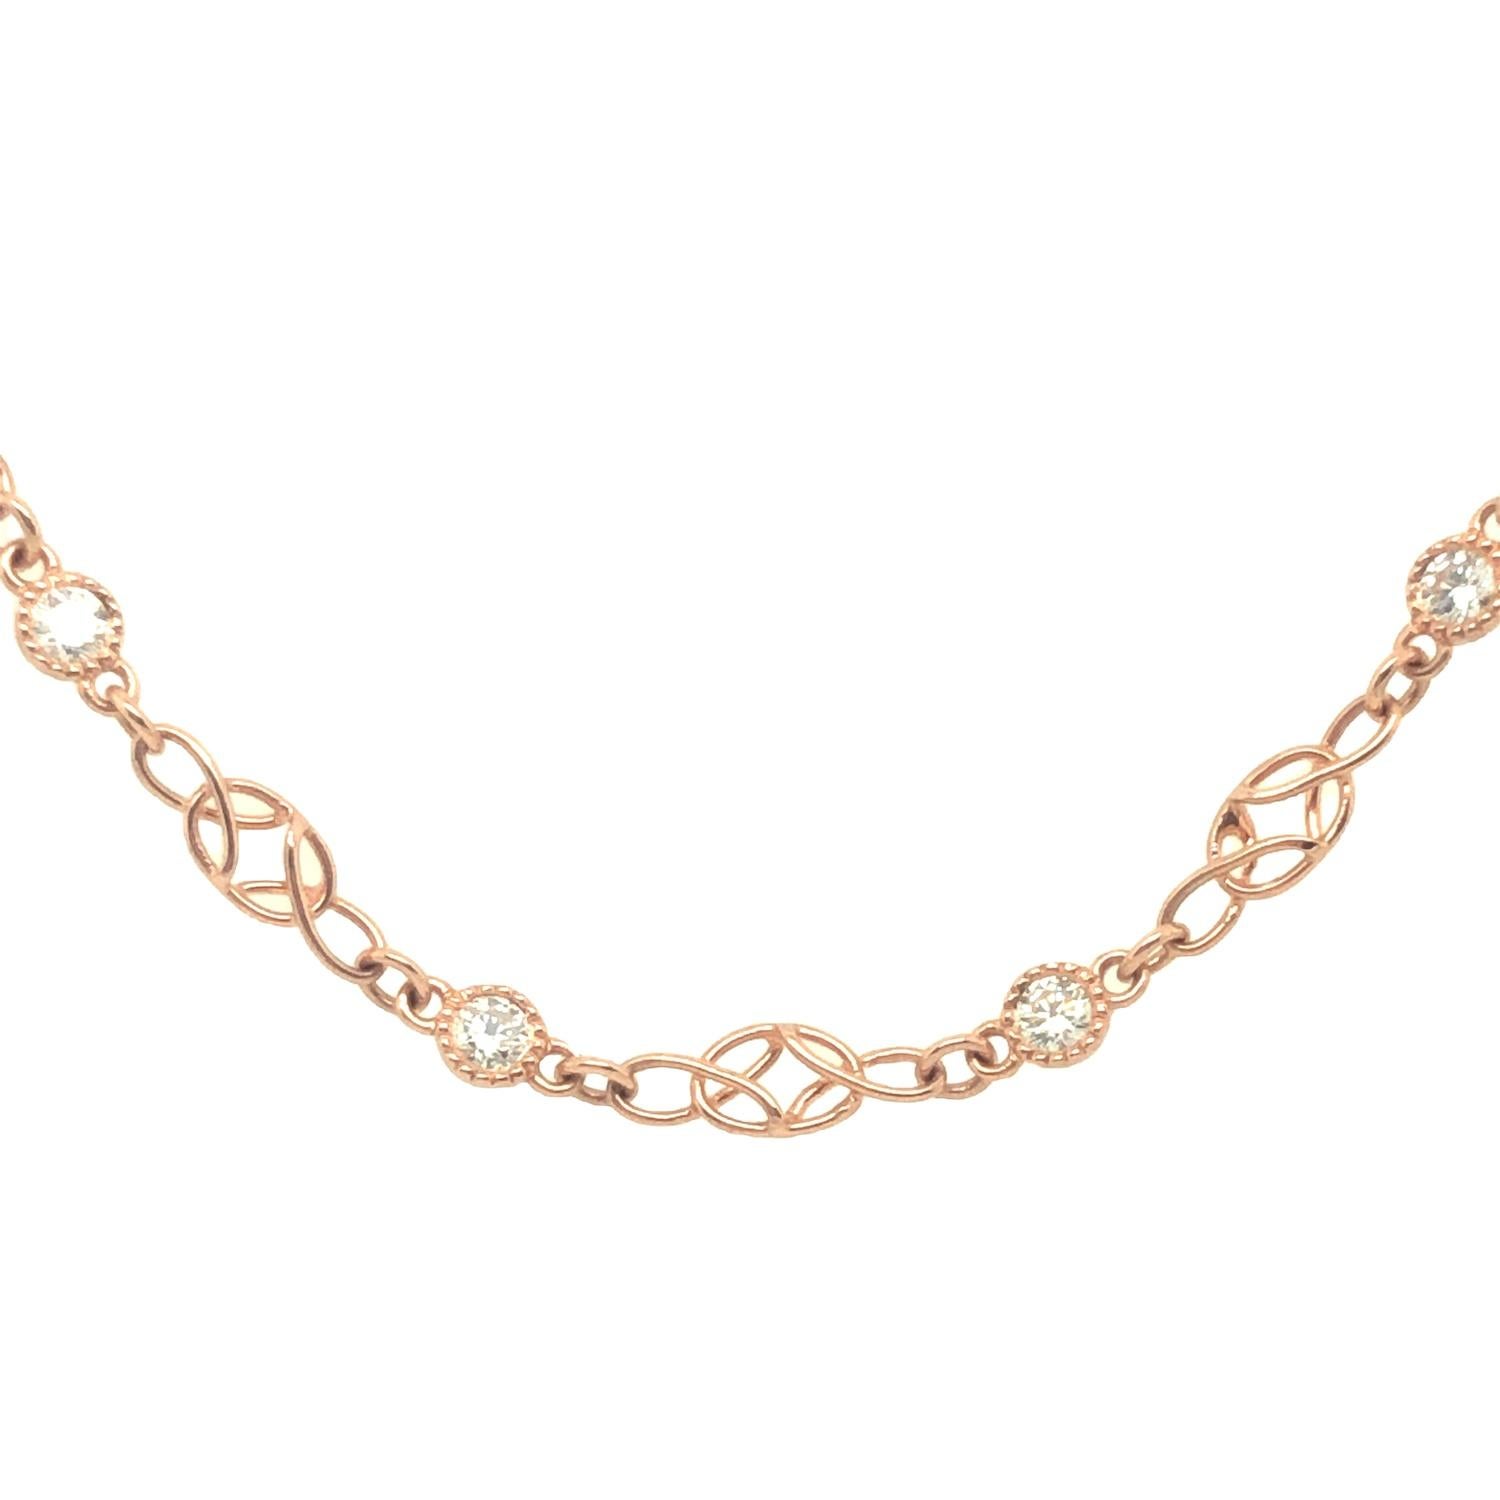 Round Cut Gems Are Forever Antique Style 1.44 Ct Diamond Link Chain Necklace 18K Rose Gold For Sale